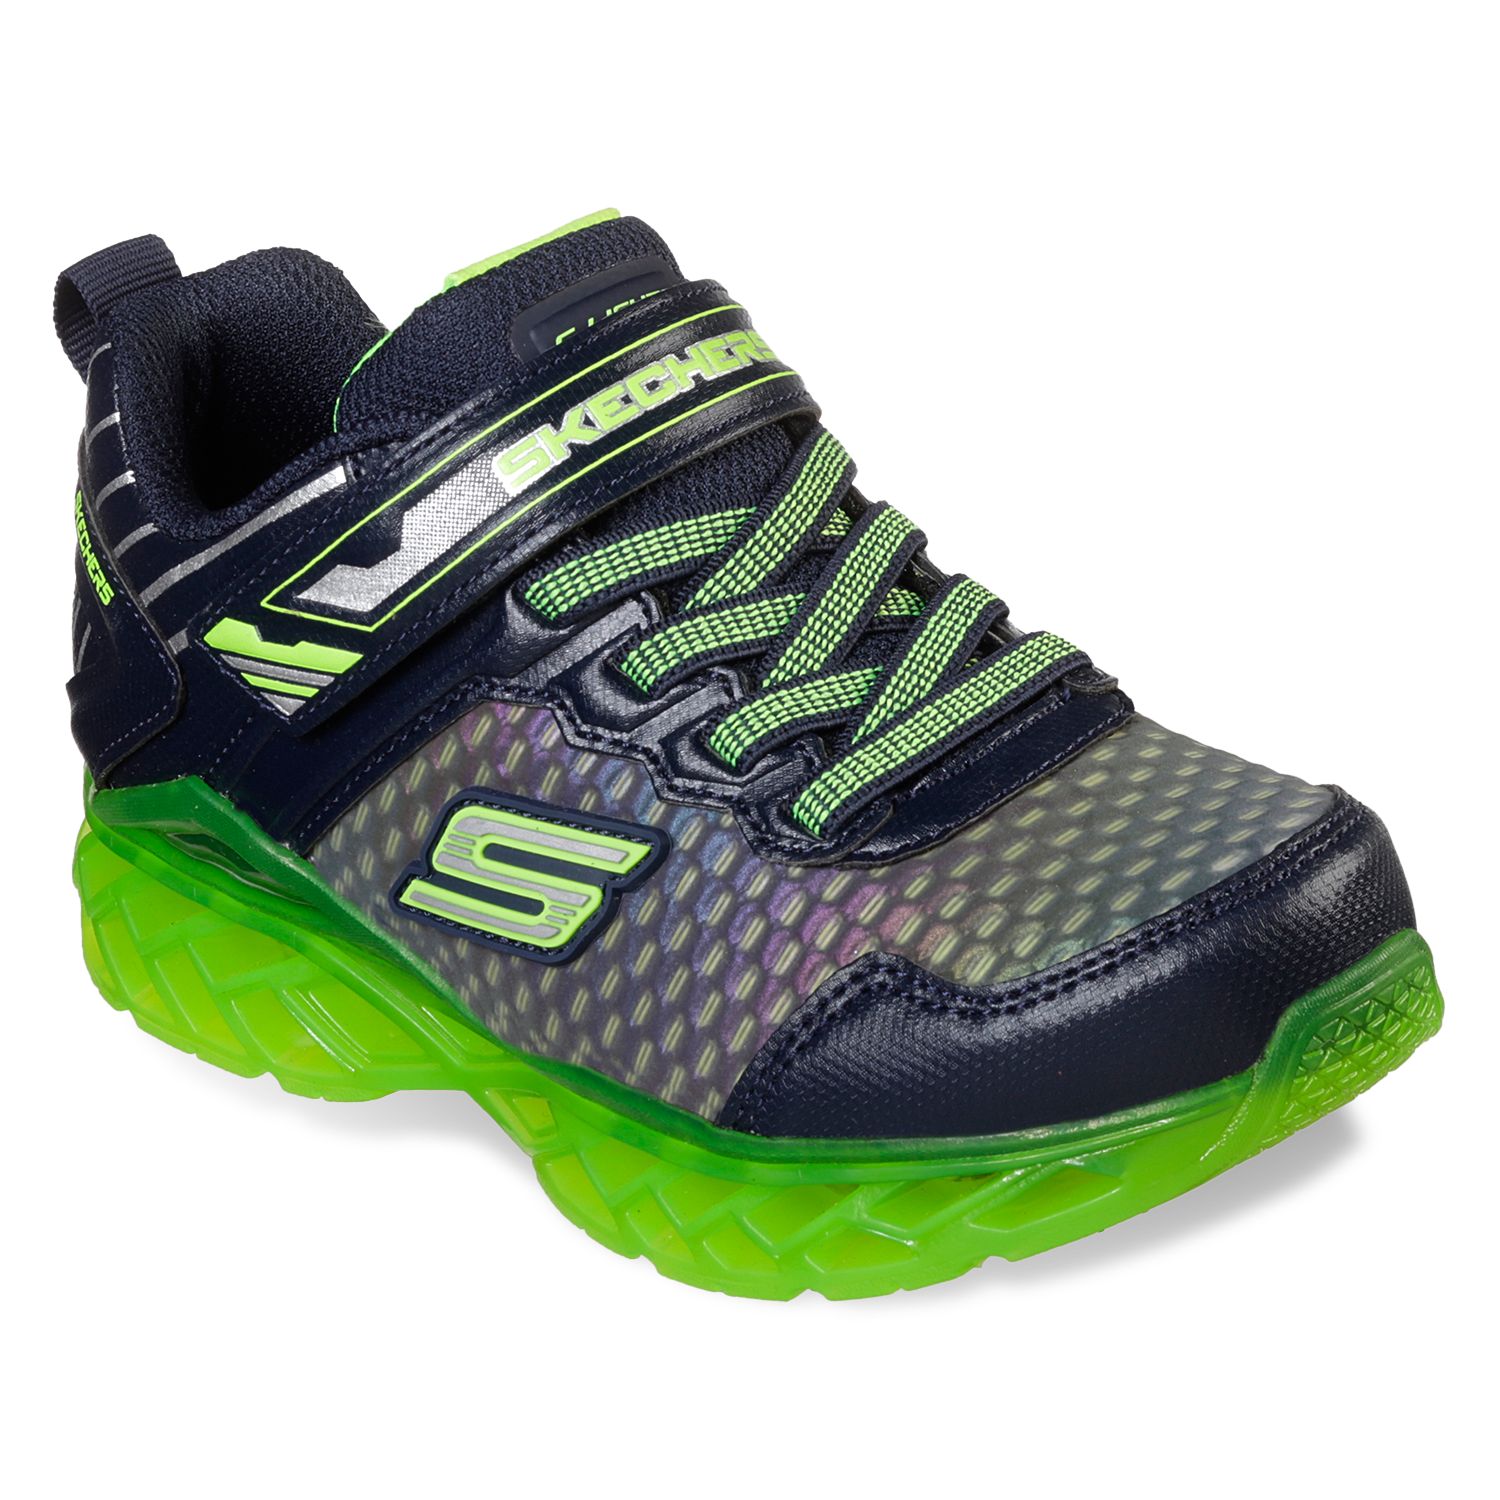 skechers light up shoes not charging